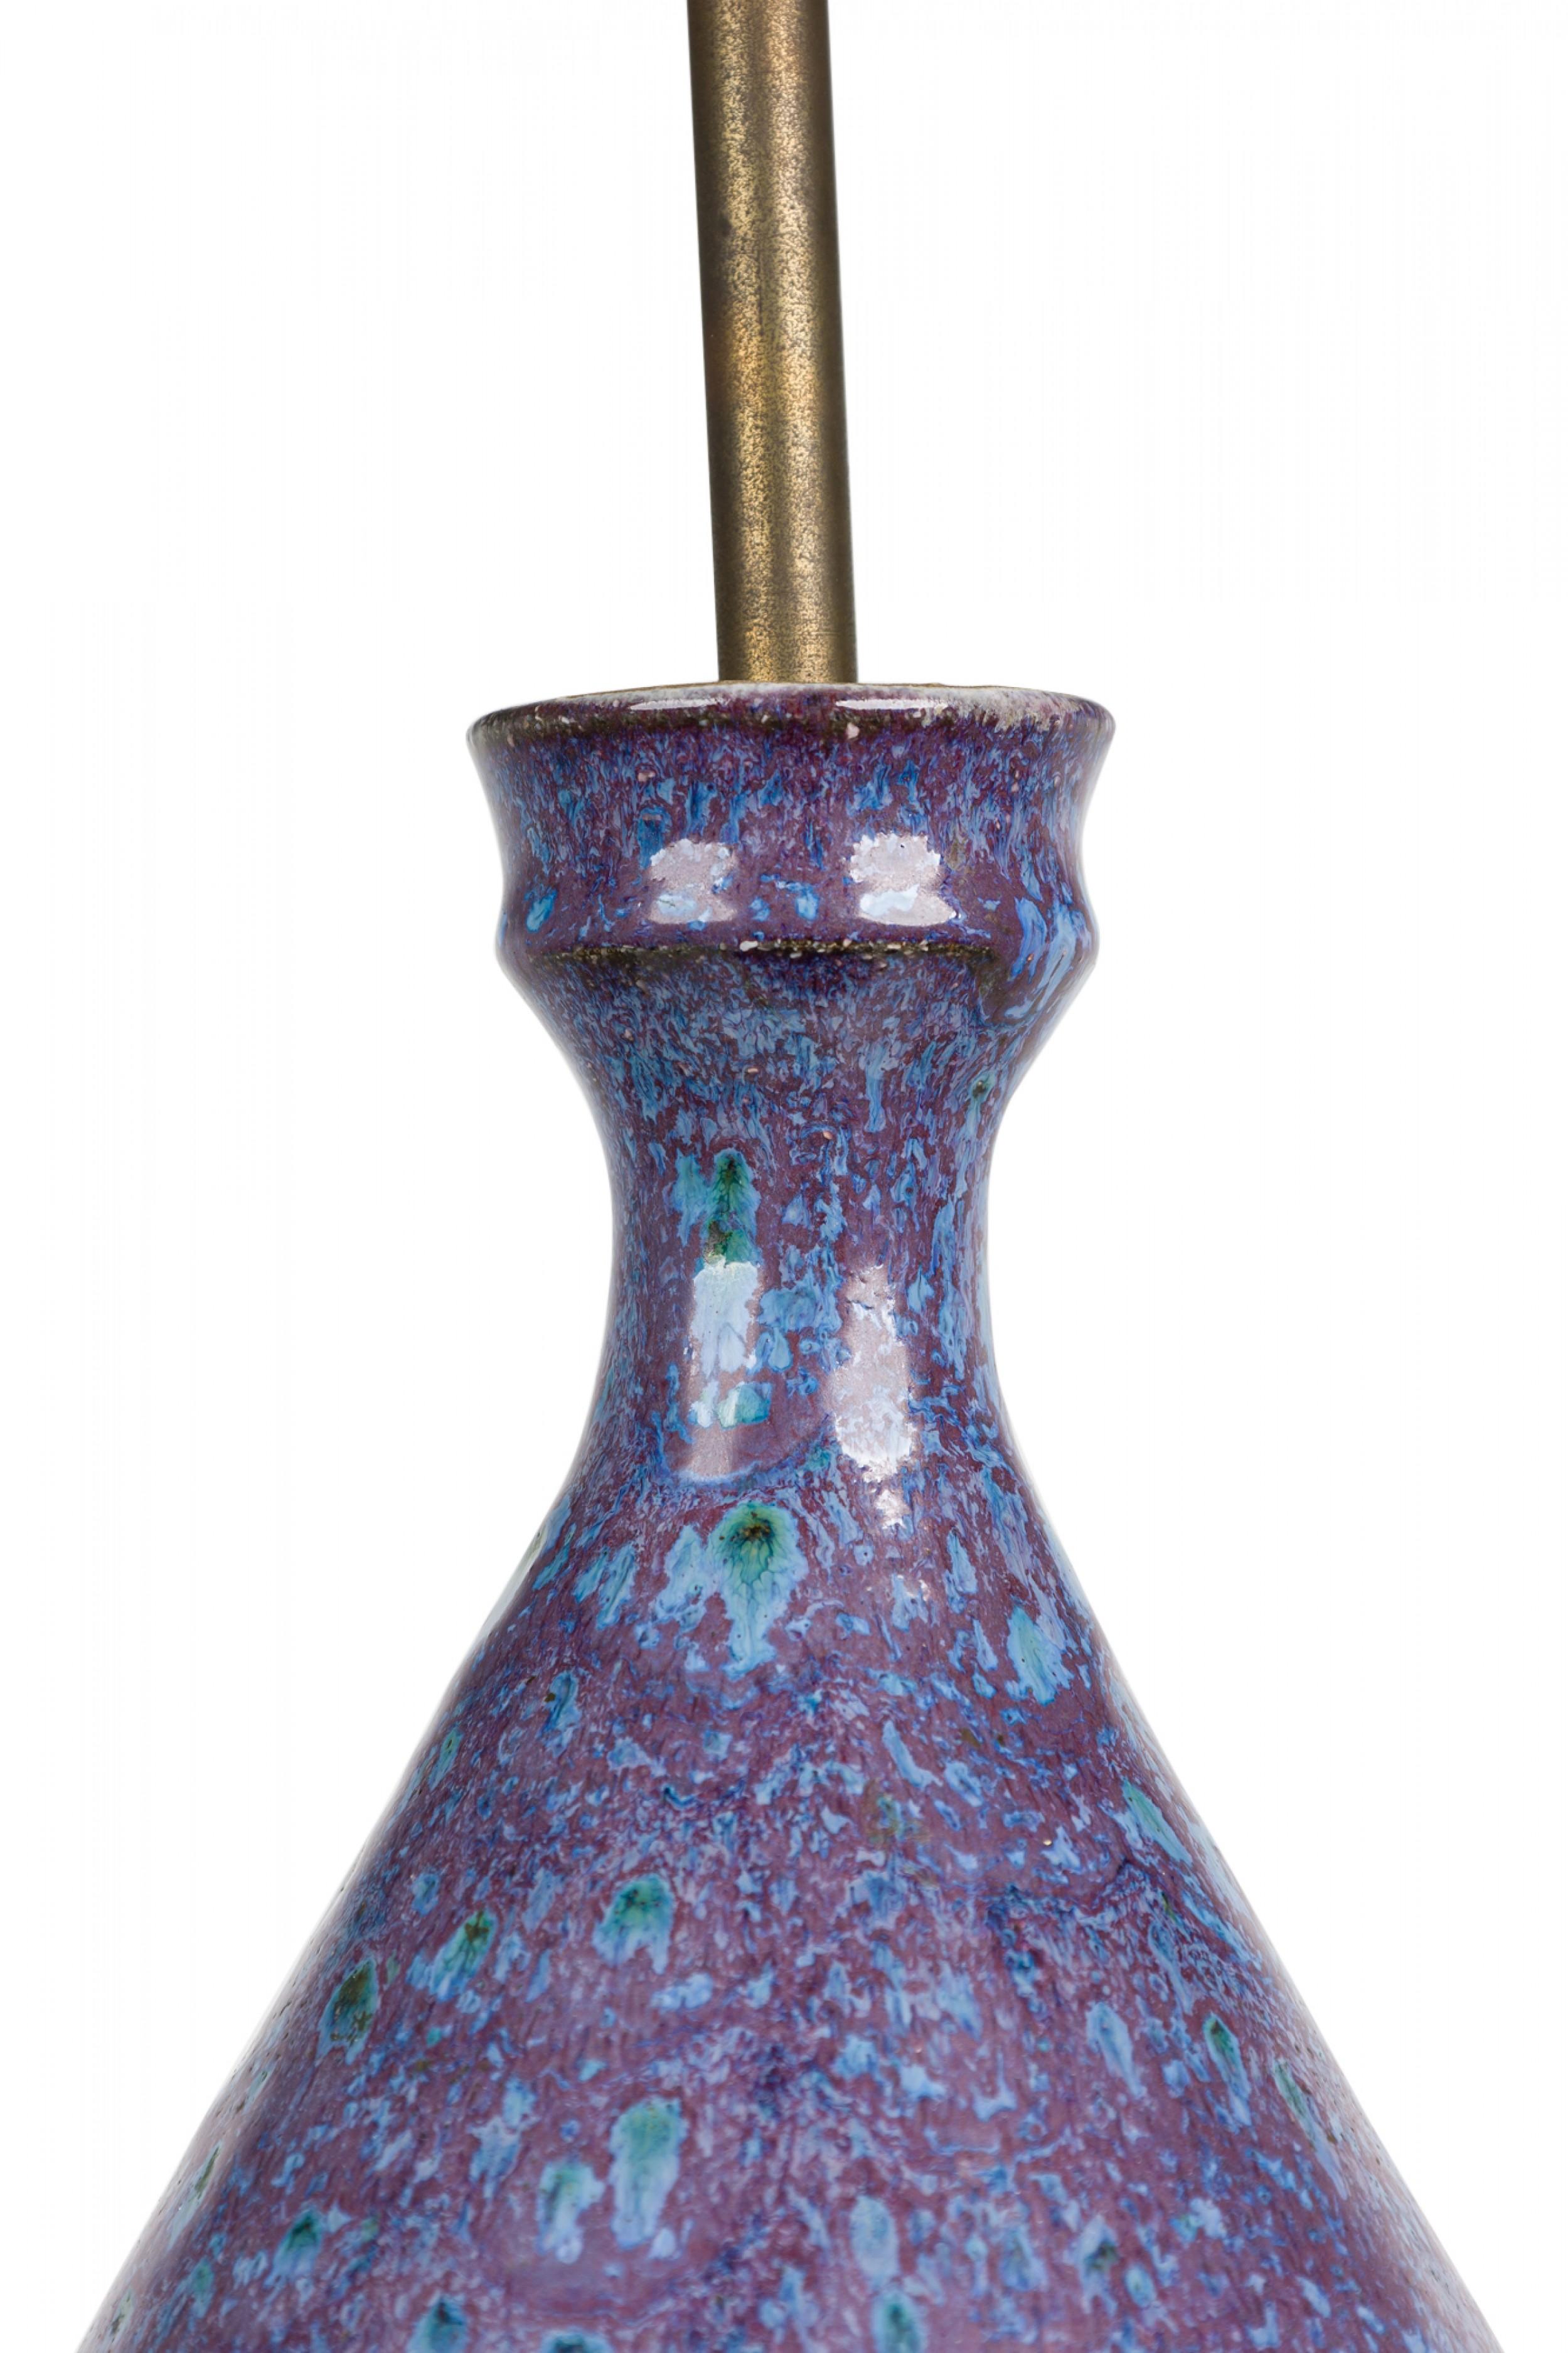 Mid-Century American ceramic table lamp peacock glazed in shades of blue, purple, and green, in tapered ovoid form with a flared, rimmed mouth housing a brass stem with two nonfunctioning light sockets, mounted on a tapered circular wood teal